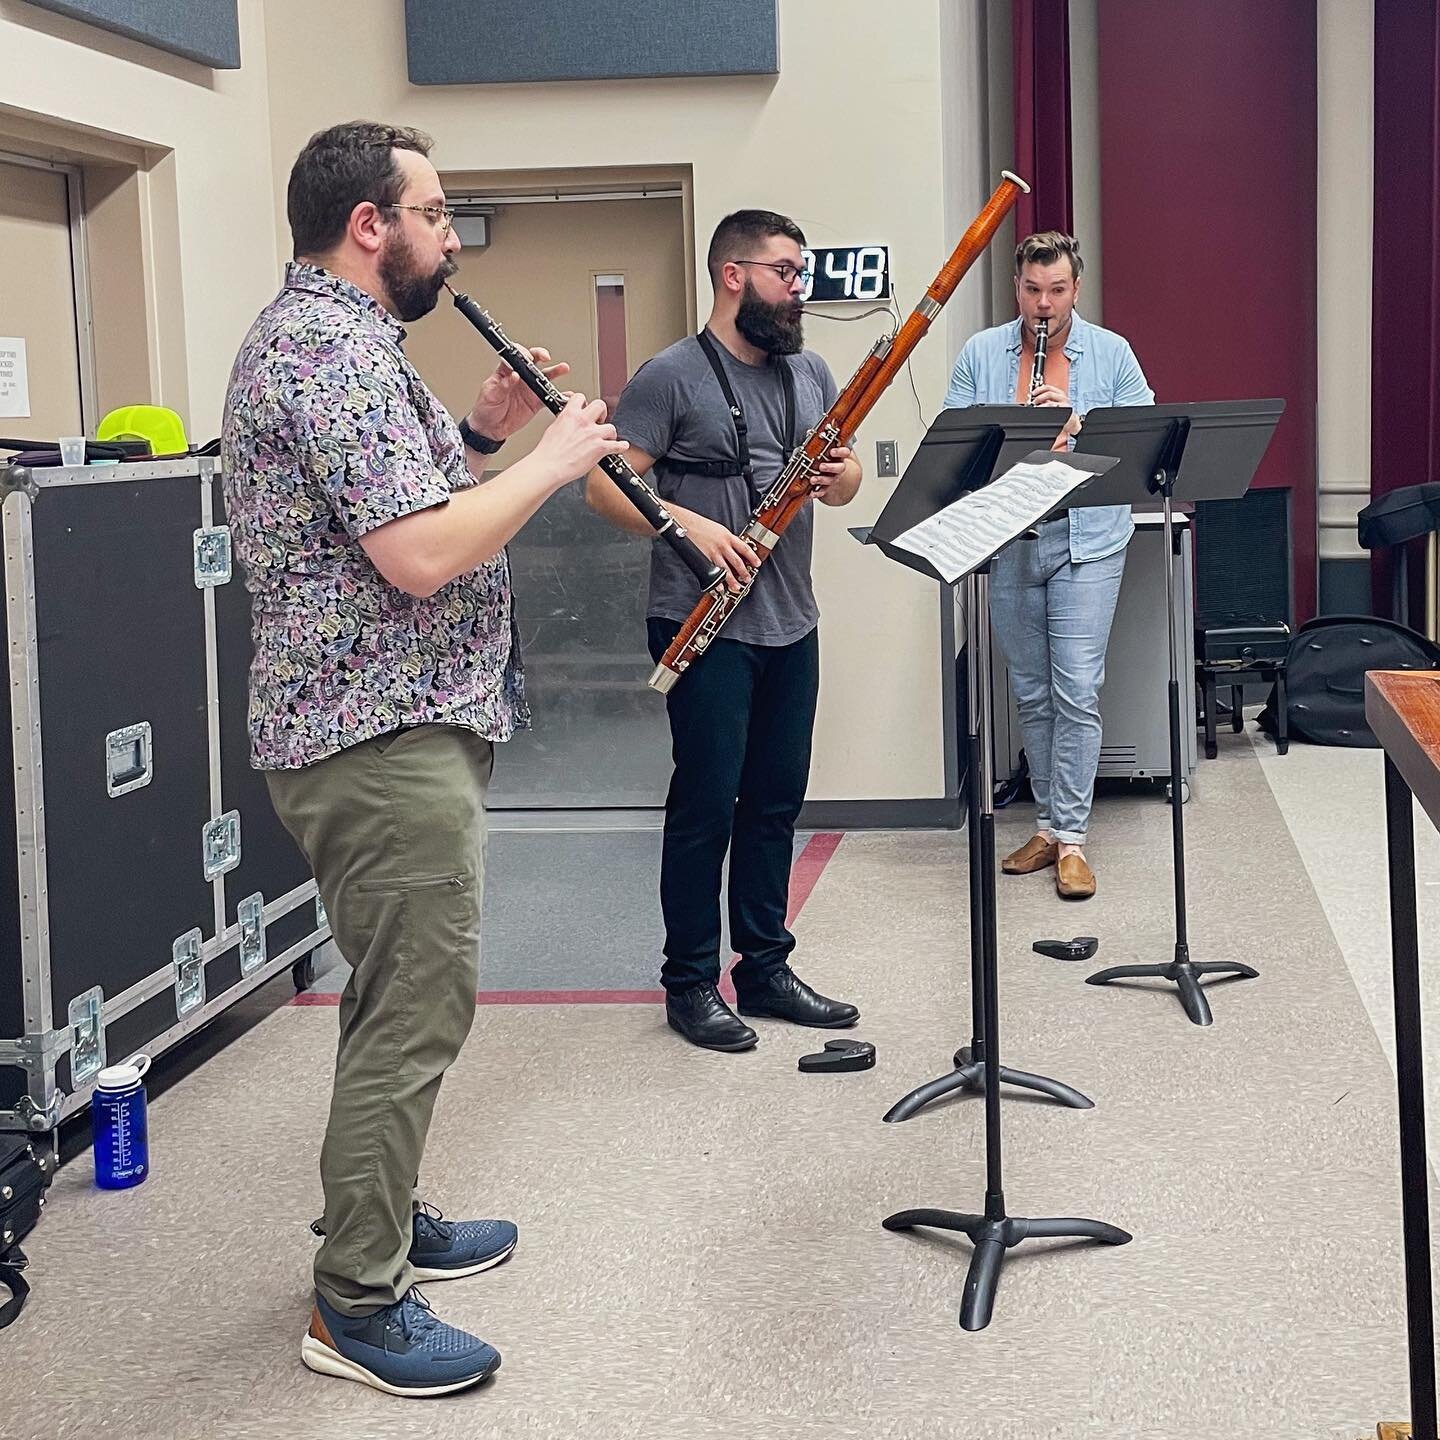 We&rsquo;ve been having a great rehearsal this morning with Ritual Action Trio on Henri Tomasi&rsquo;s &ldquo;Divertimento Corsica&rdquo;! 

Don&rsquo;t forget! Concert tomorrow at 2:00PM at Well Spring&rsquo;s Virginia Somerville Sutton Theater!